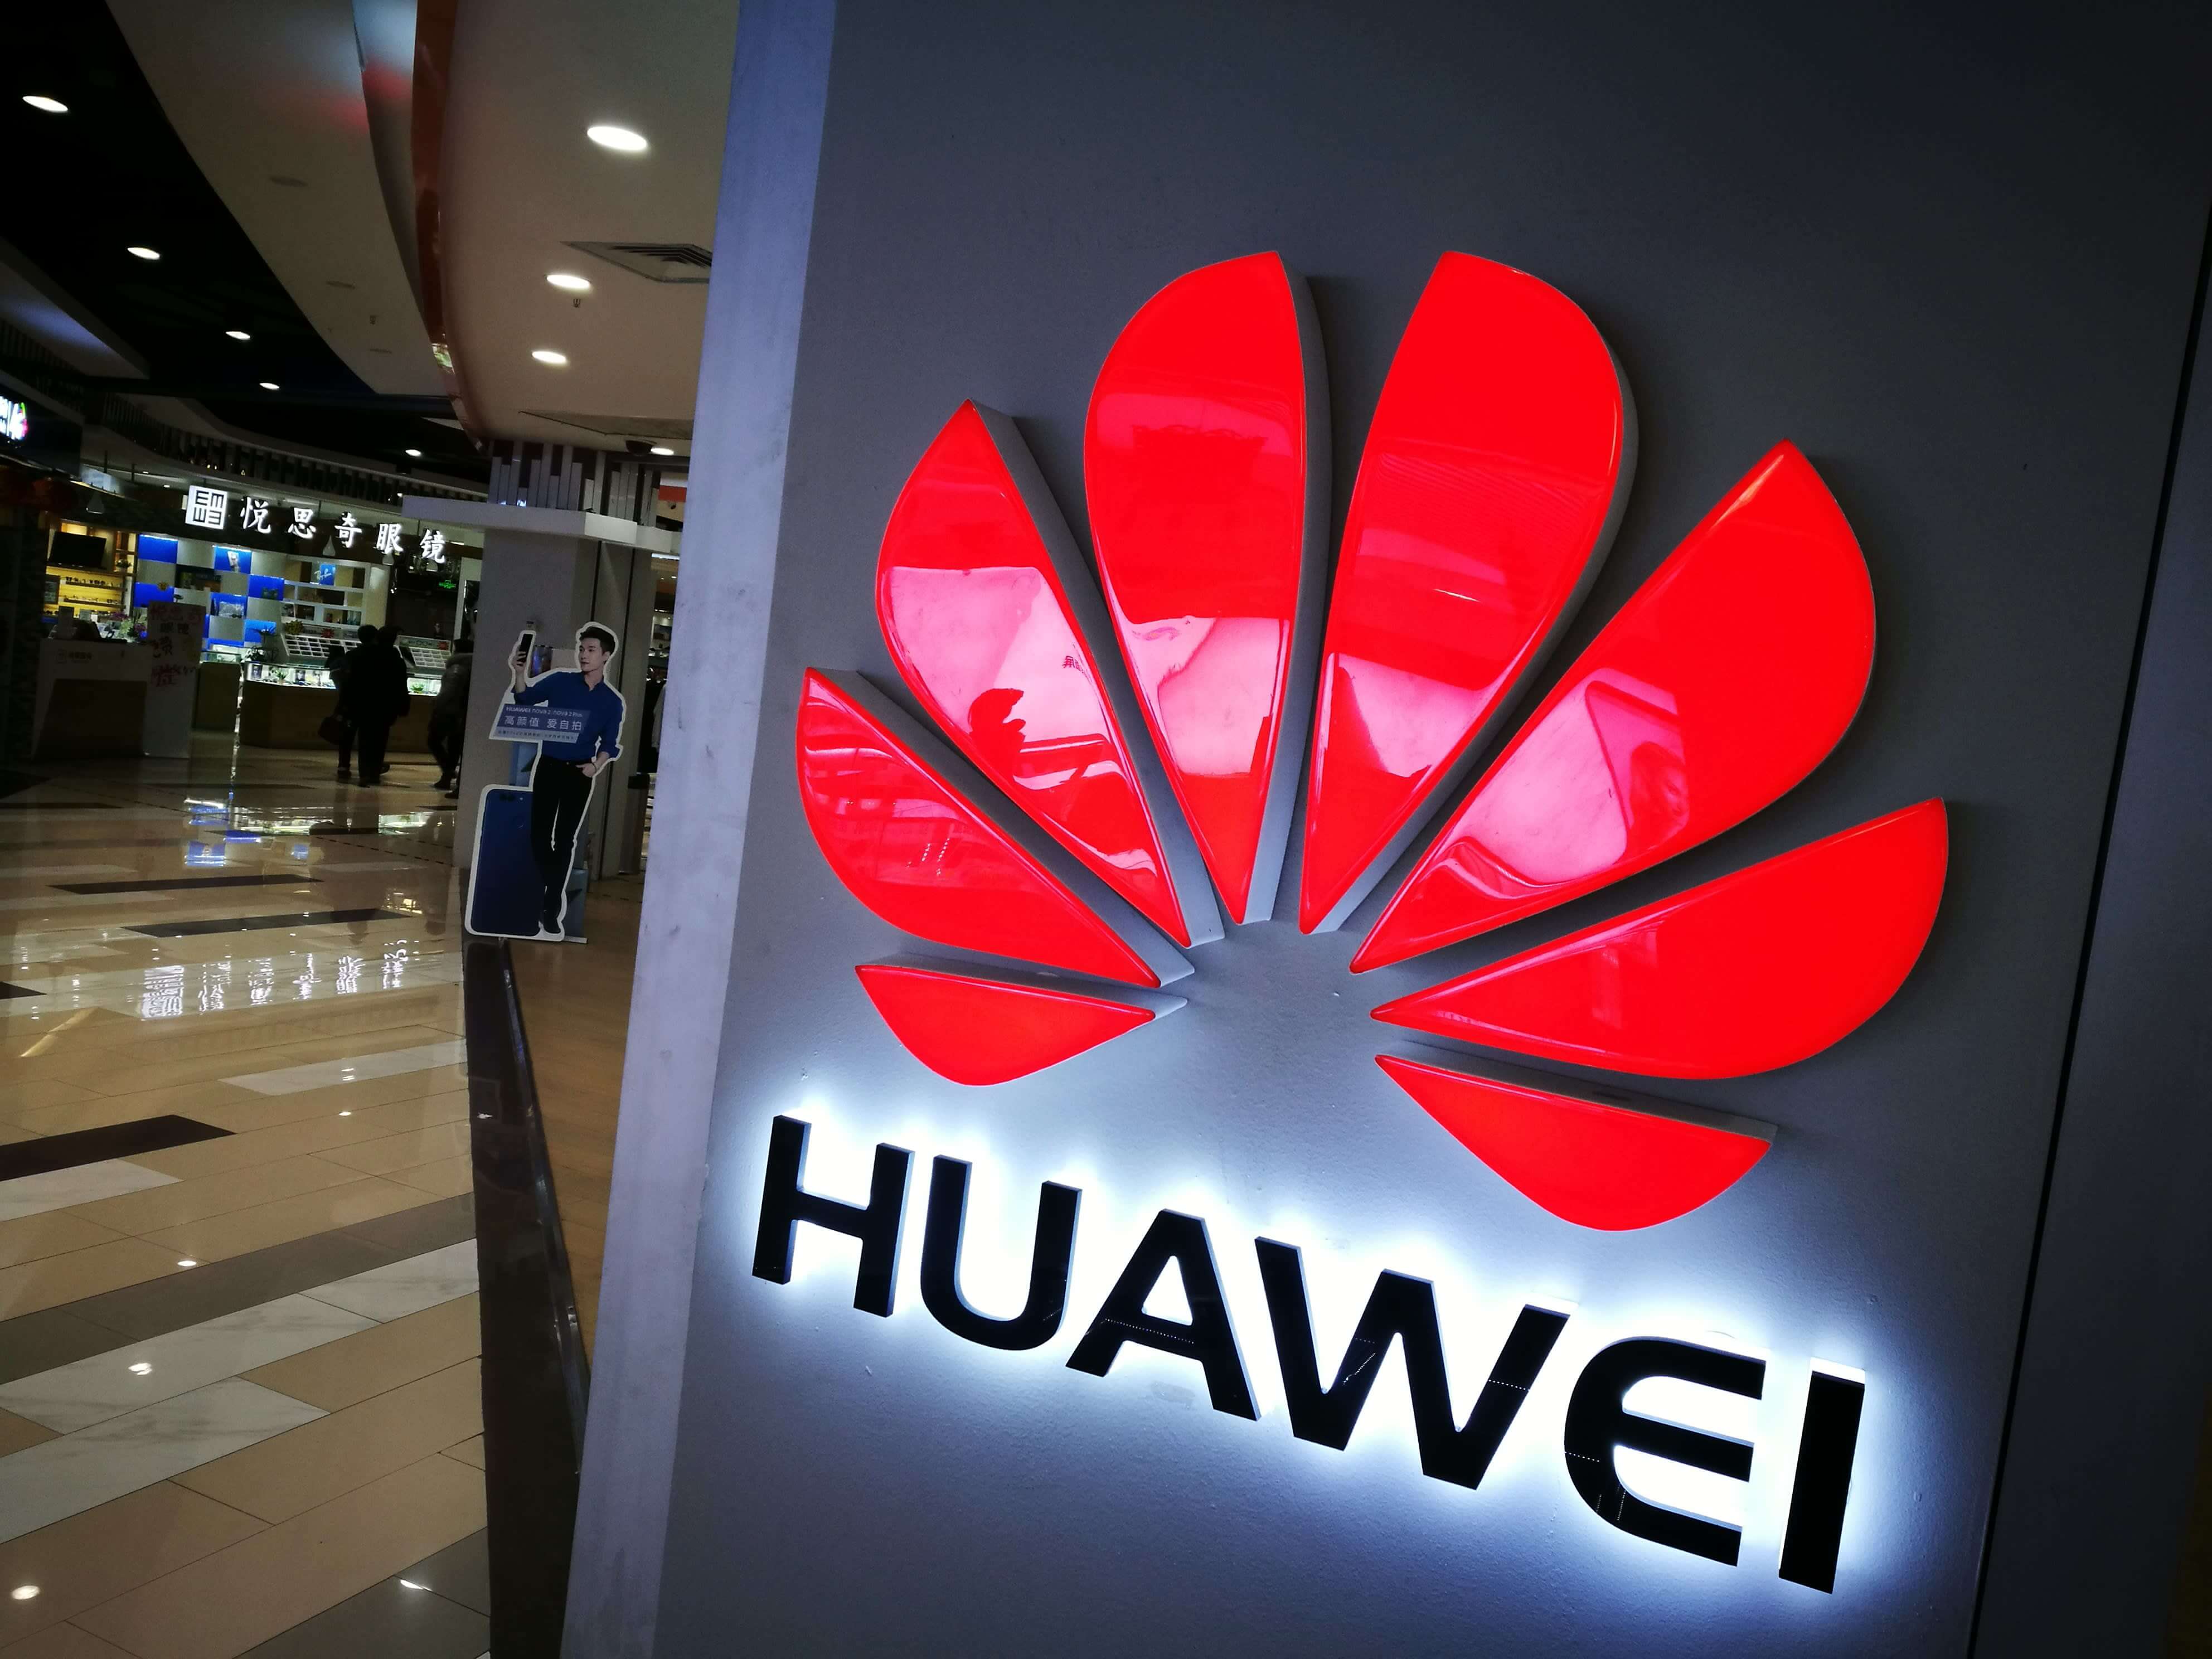 UK government allows Huawei a role in its 5G network